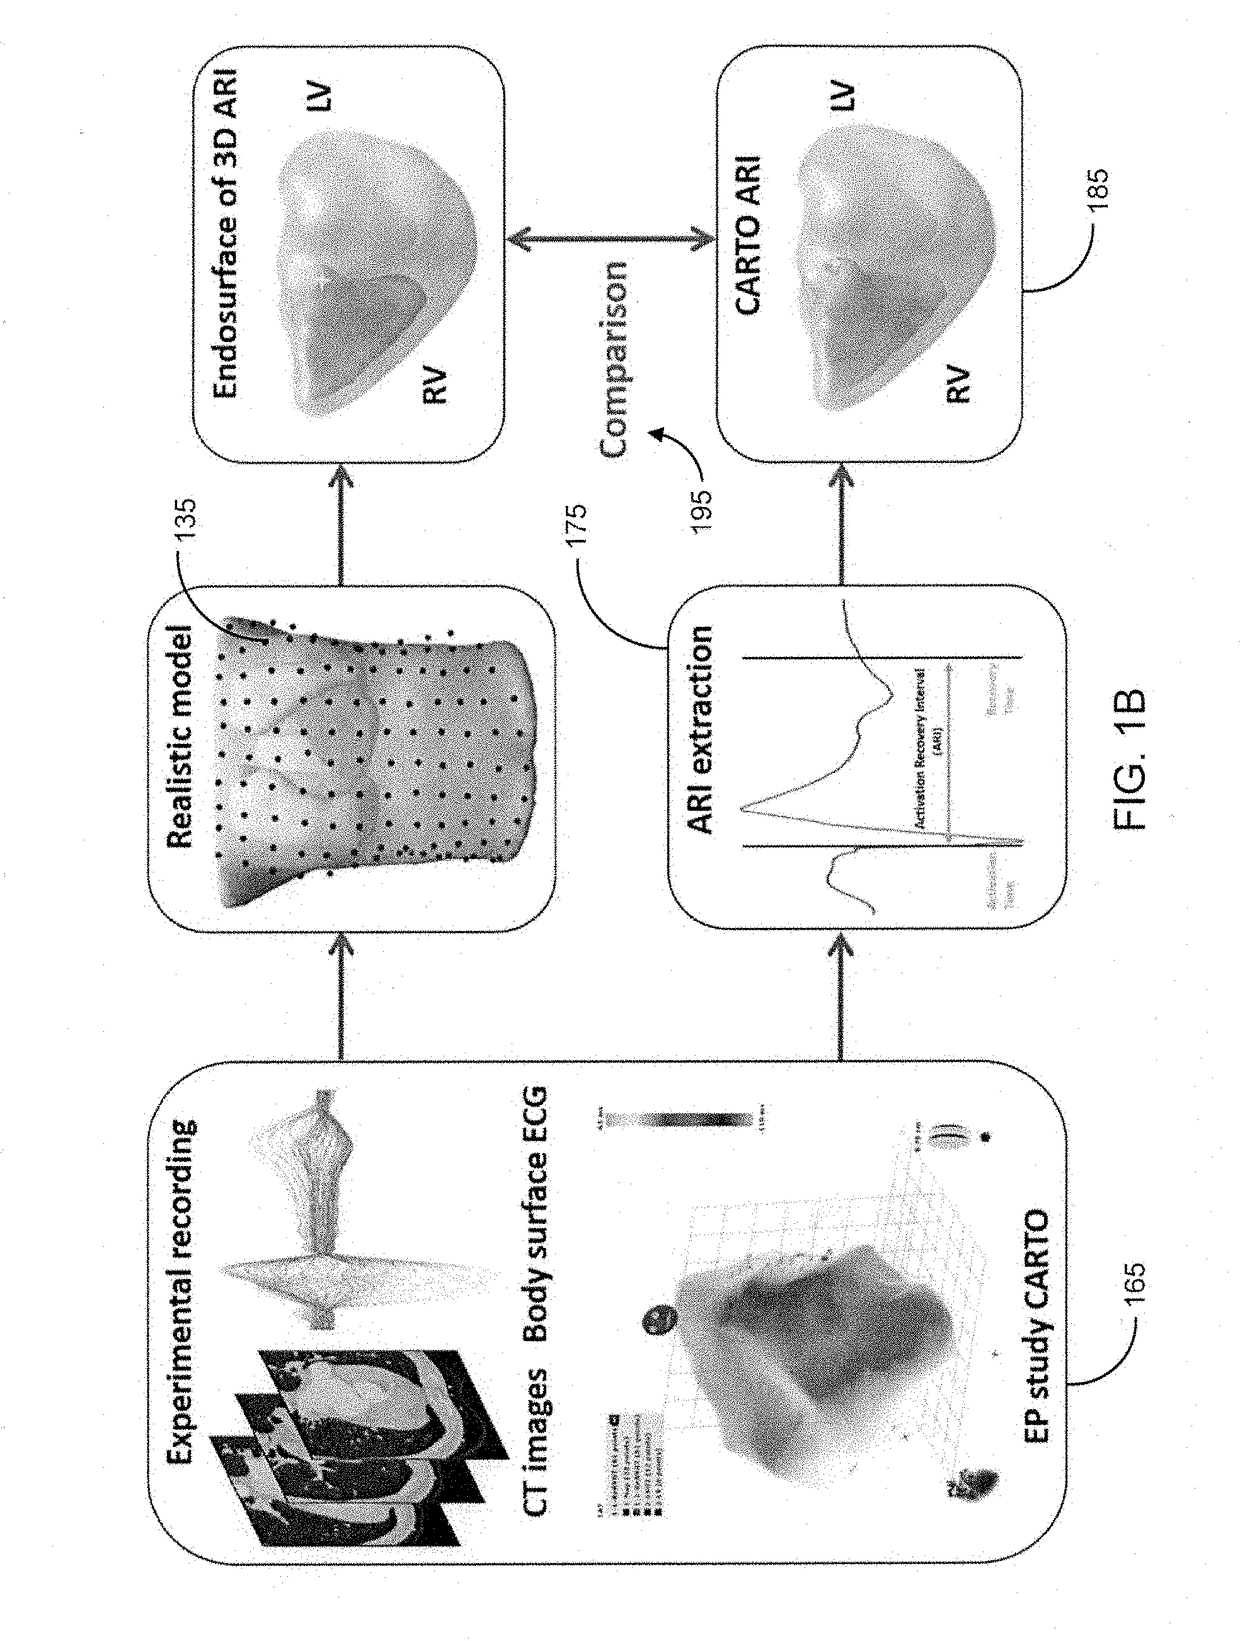 System and method for activation recovery interval imaging of cardiac disorders